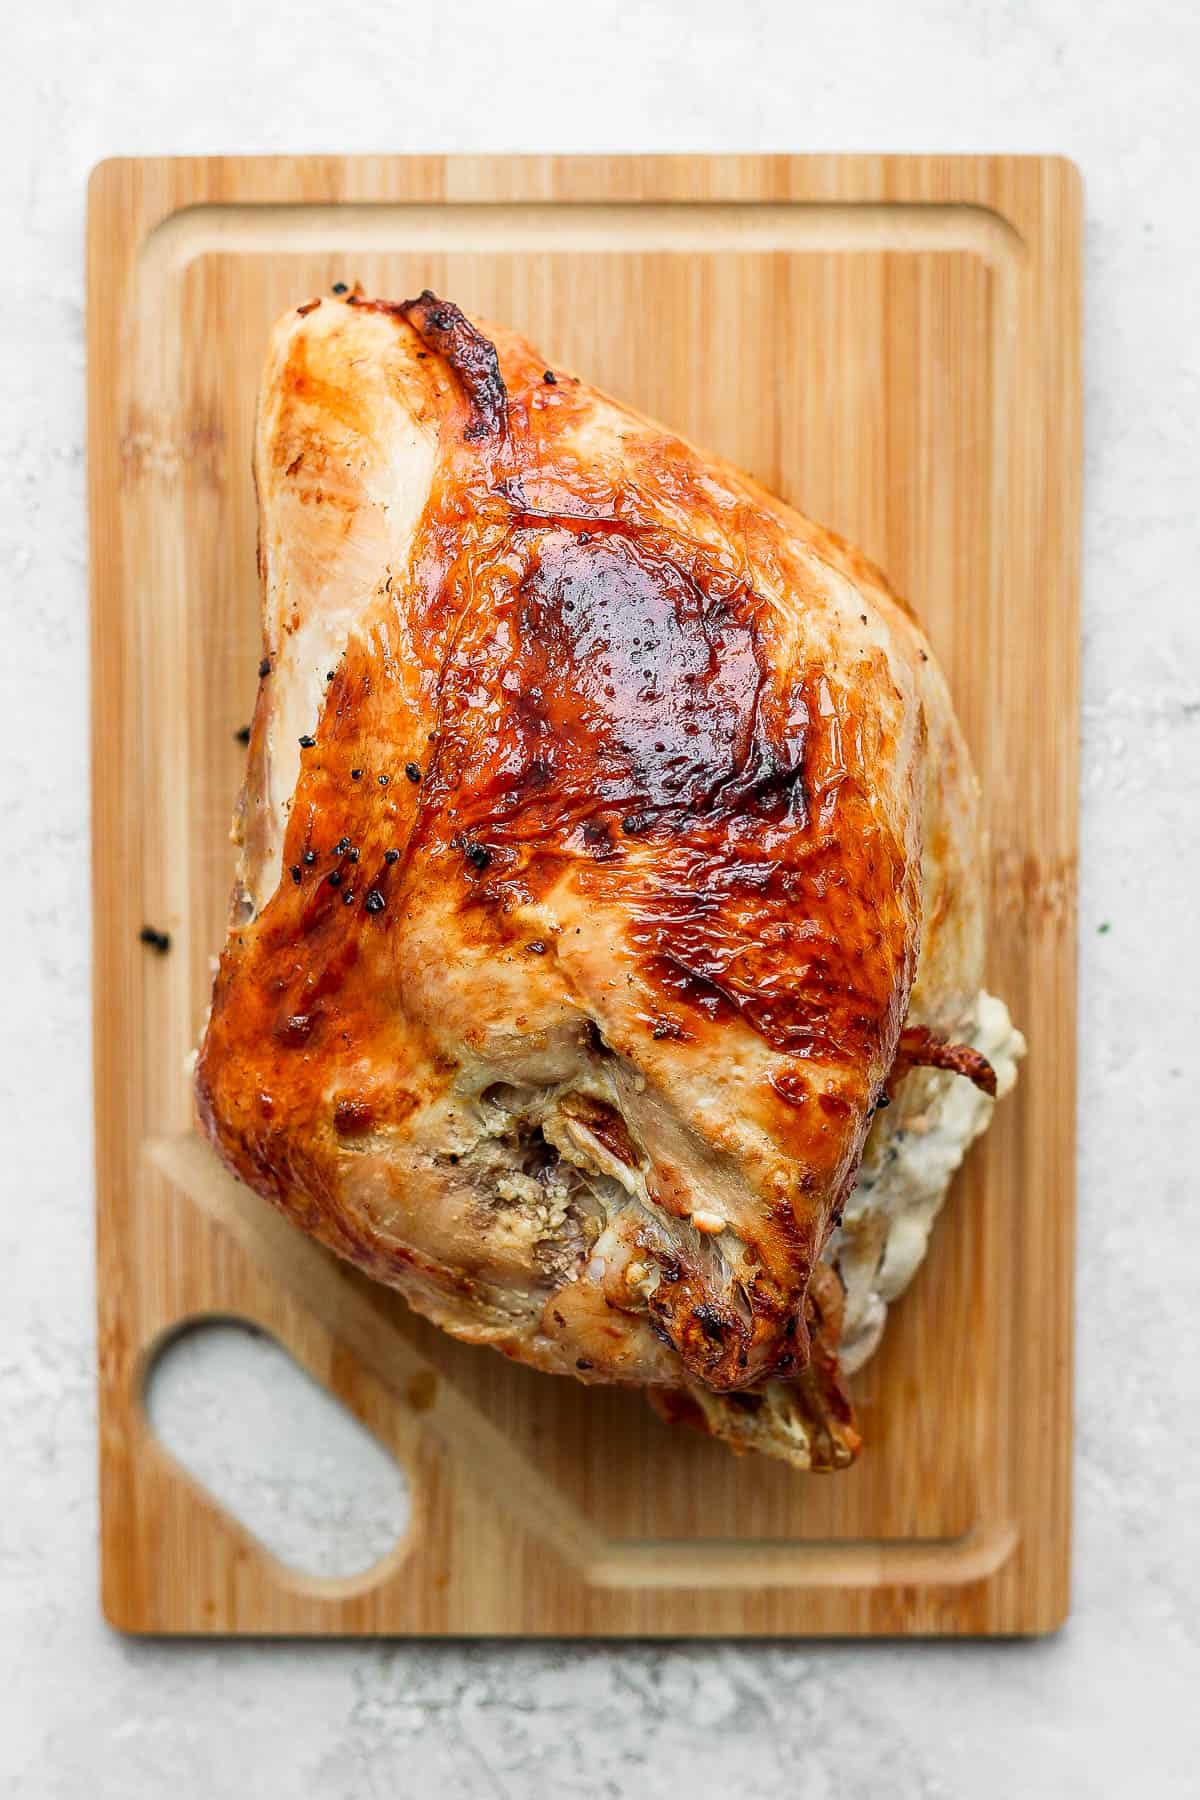 A fully cooked turkey breast on a cutting board.